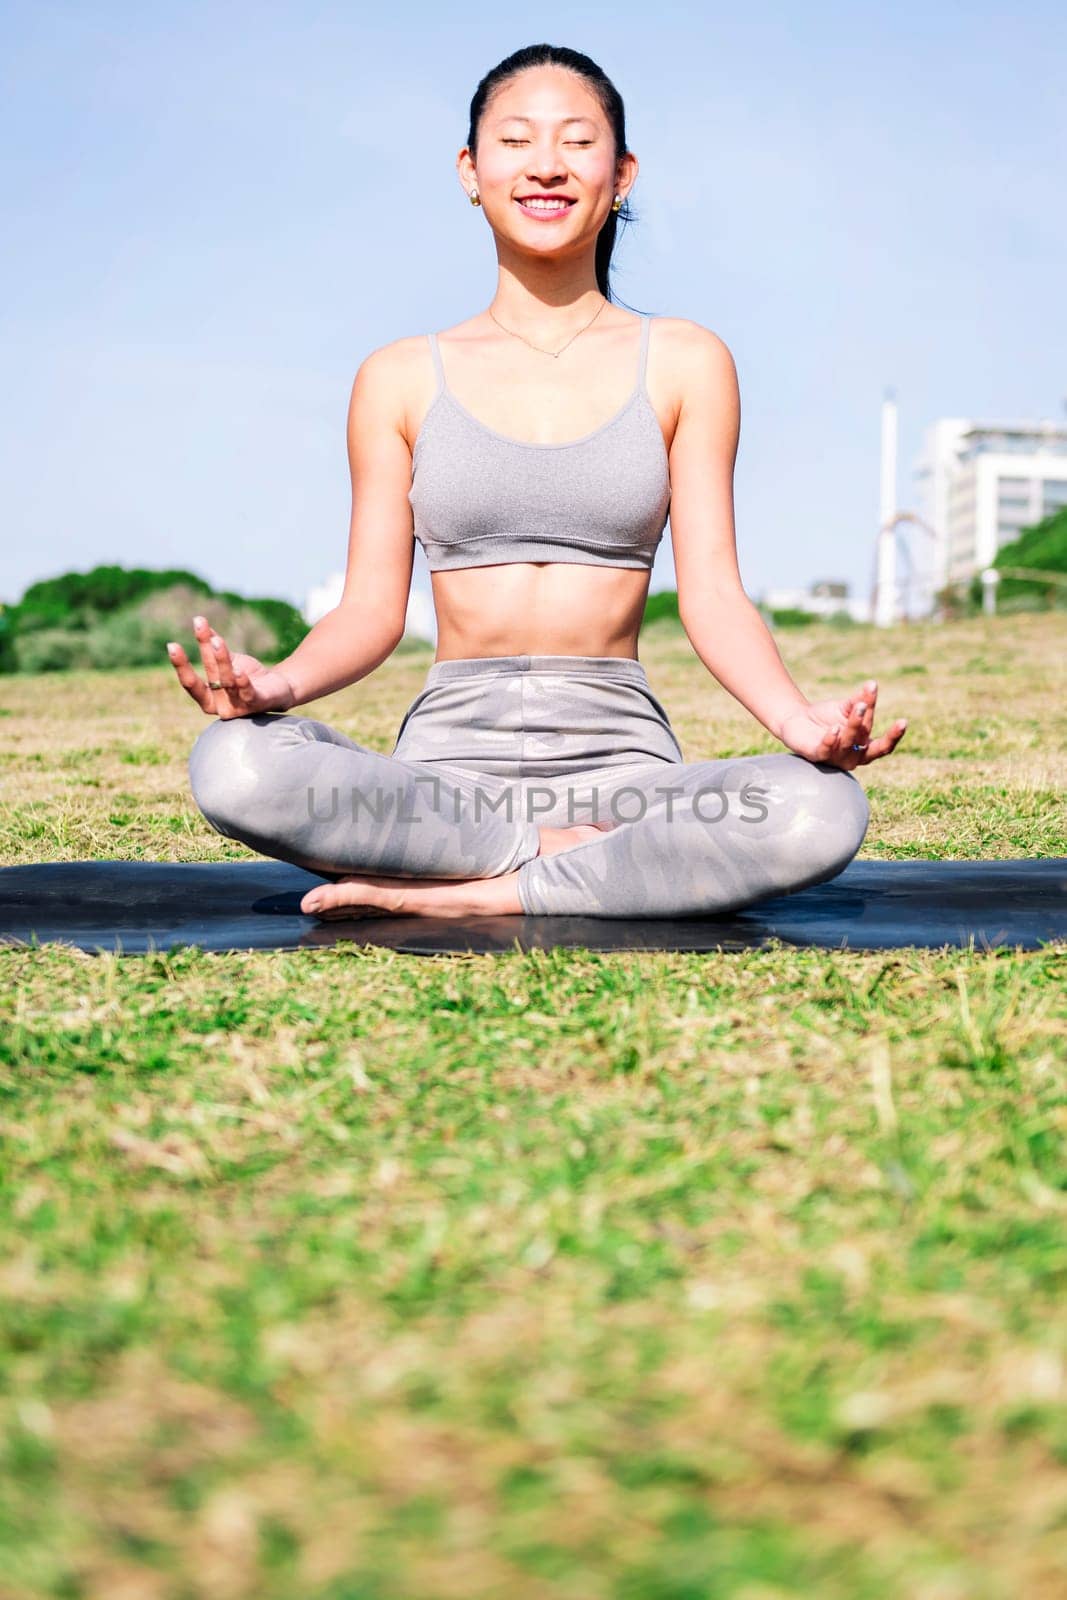 smiling young asian woman doing meditation at park sitting on a yoga mat, concept of mental relaxation and healthy lifestyle, copy space for text